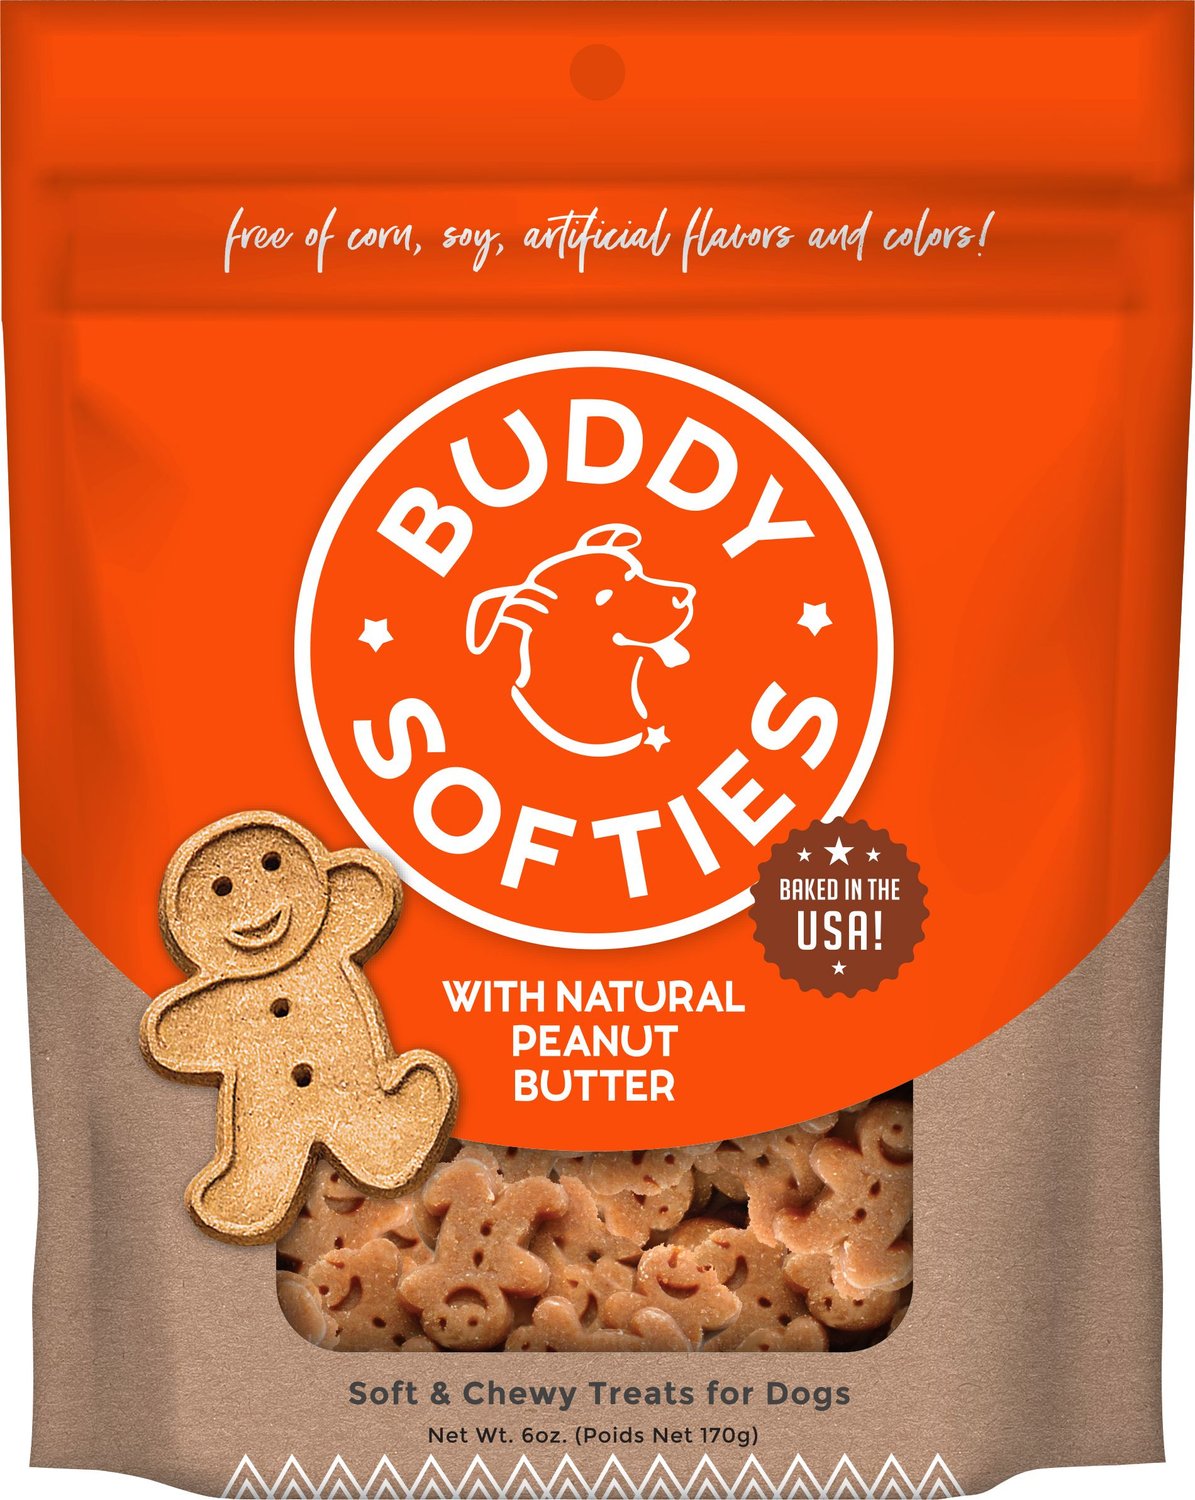 are buddy biscuits safe for dogs